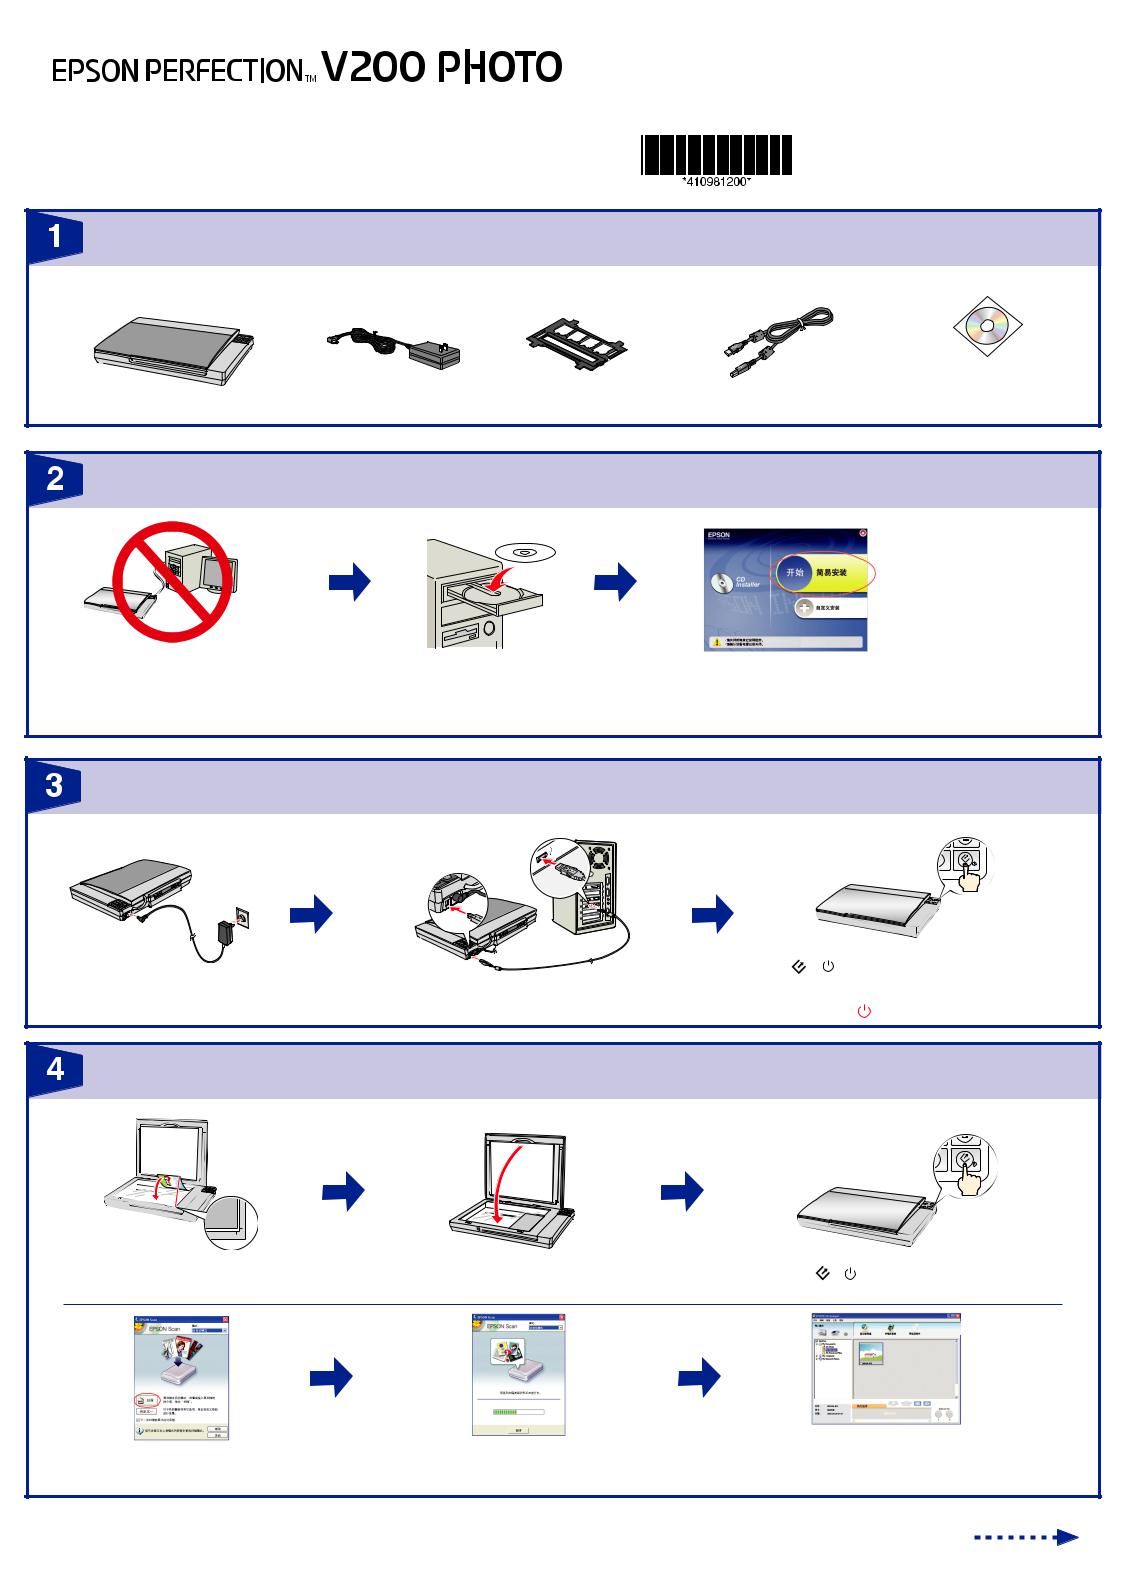 Epson PERFECTION V200 PHOTO Quick start guide